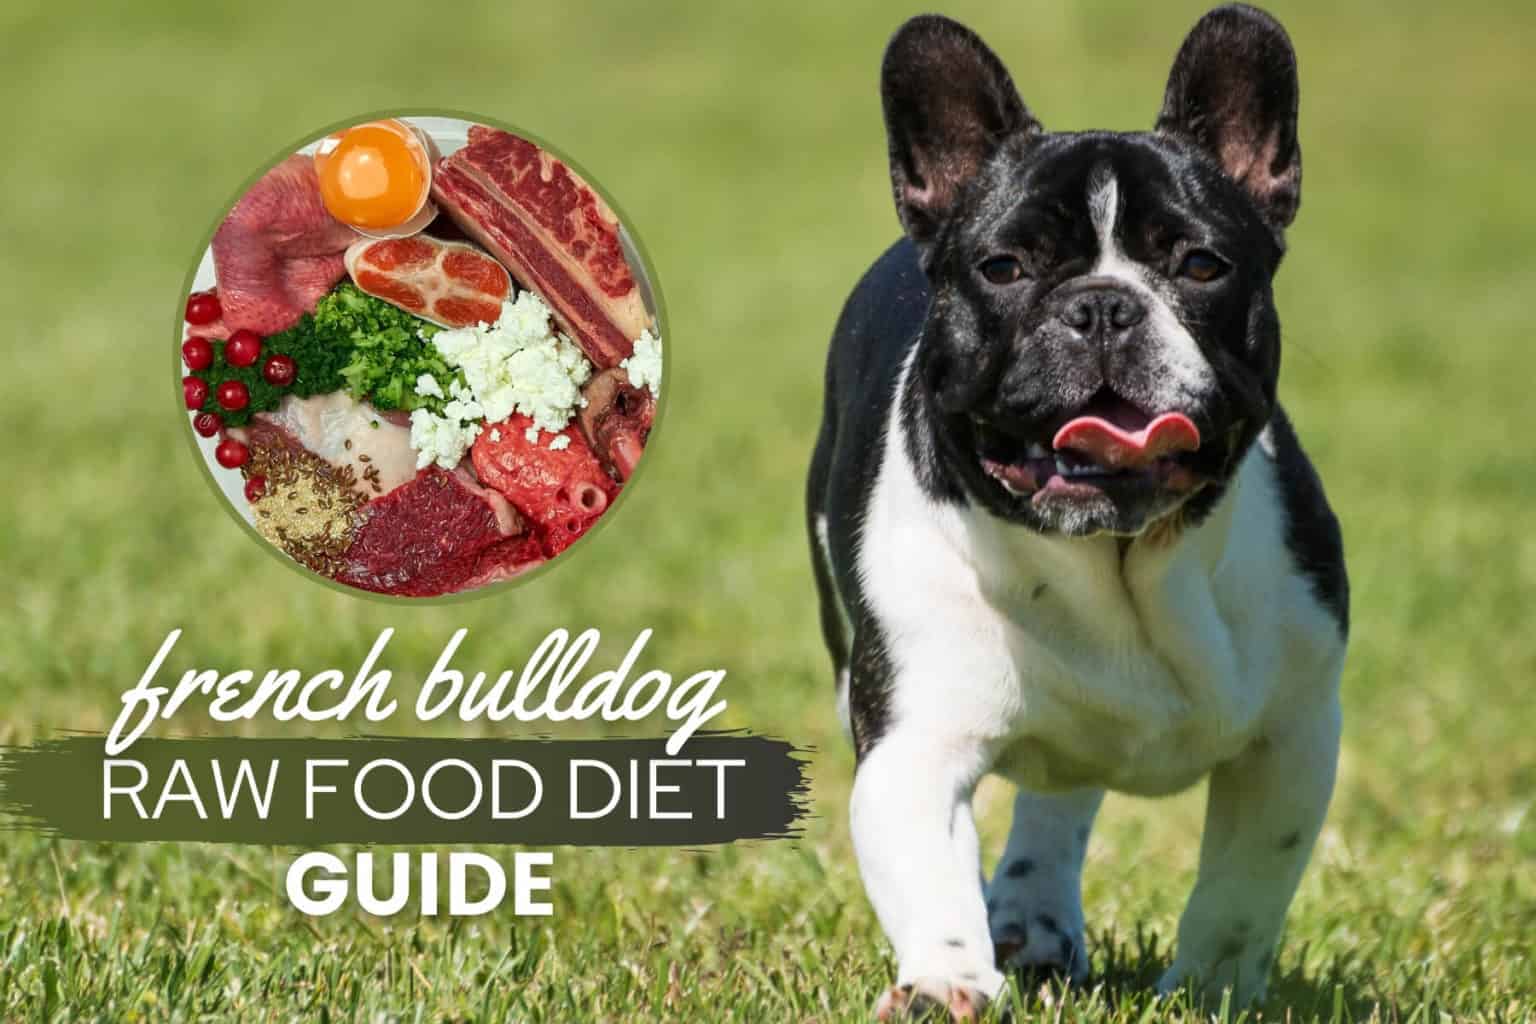 French Bulldog Raw Food Diet Guide Recipes, Benefits